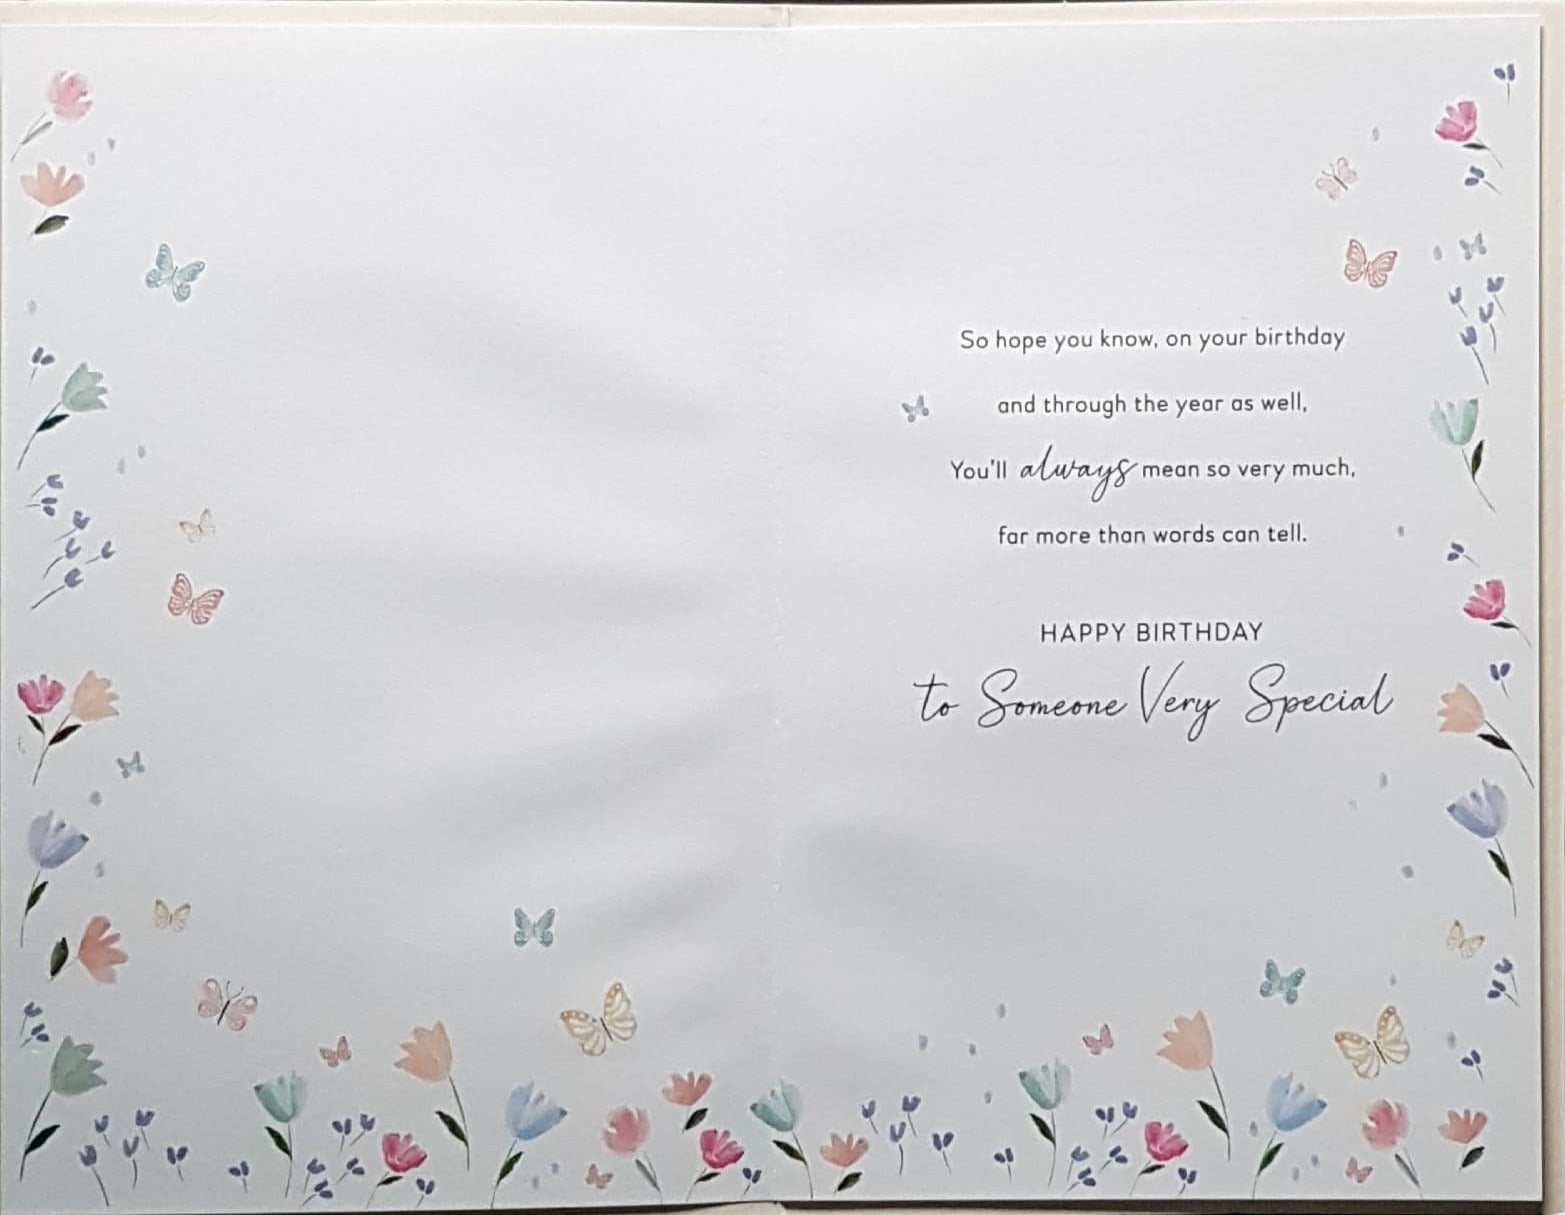 Birthday Card - Someone Special / 'Birthday Thoughts Of You' & Pretty Flowers